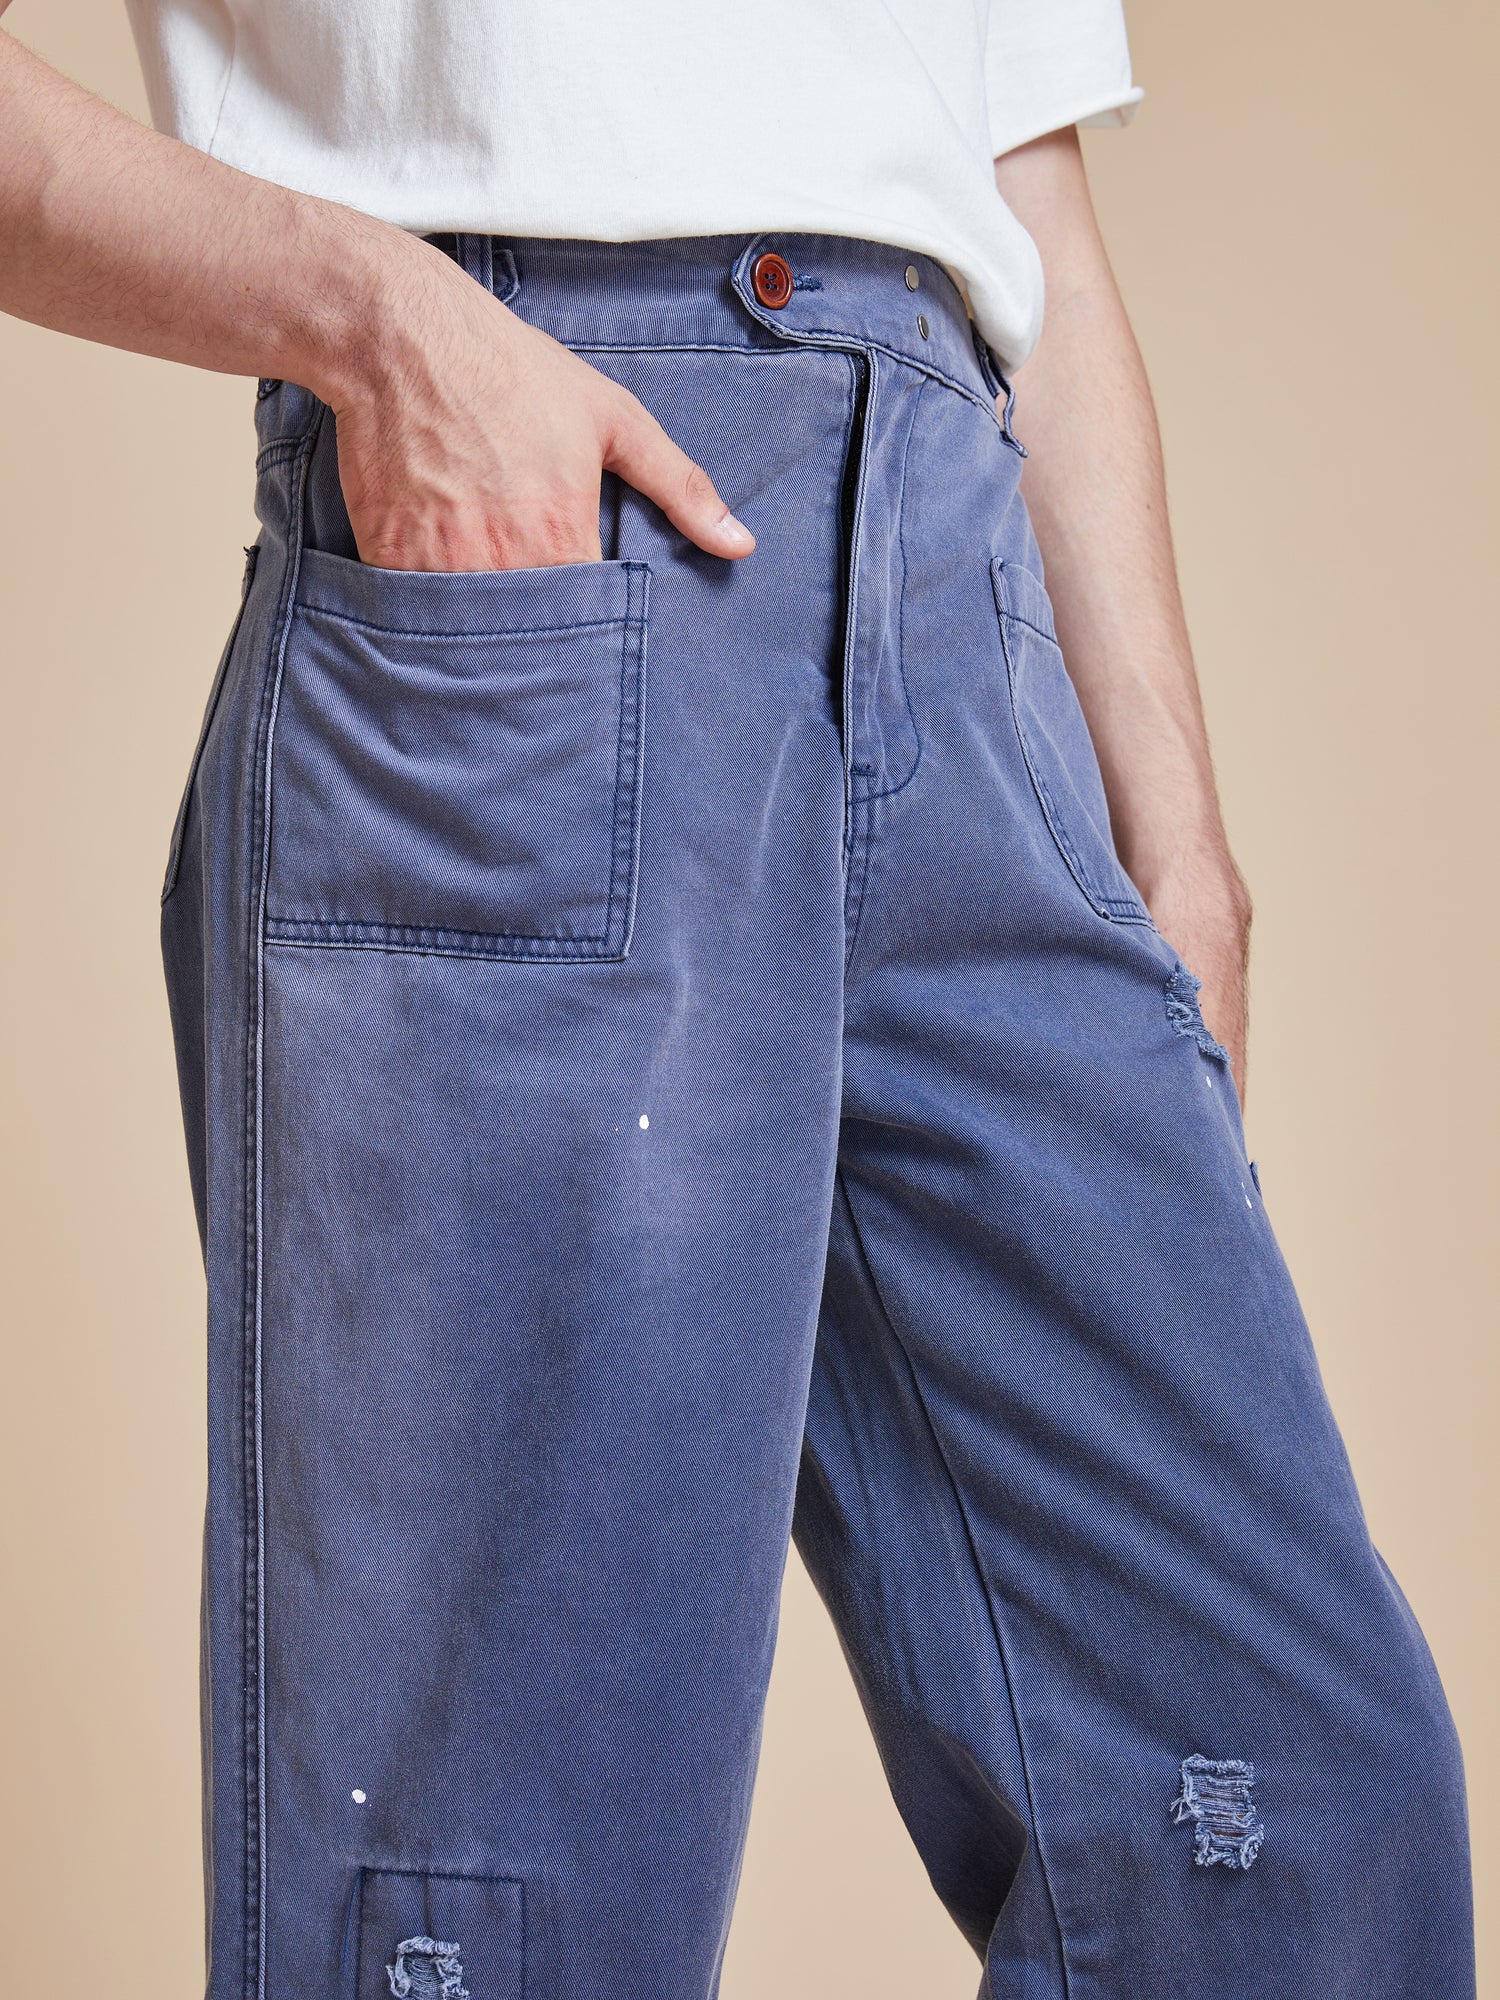 A man is wearing Found River Painters Chore Pants with holes in them.